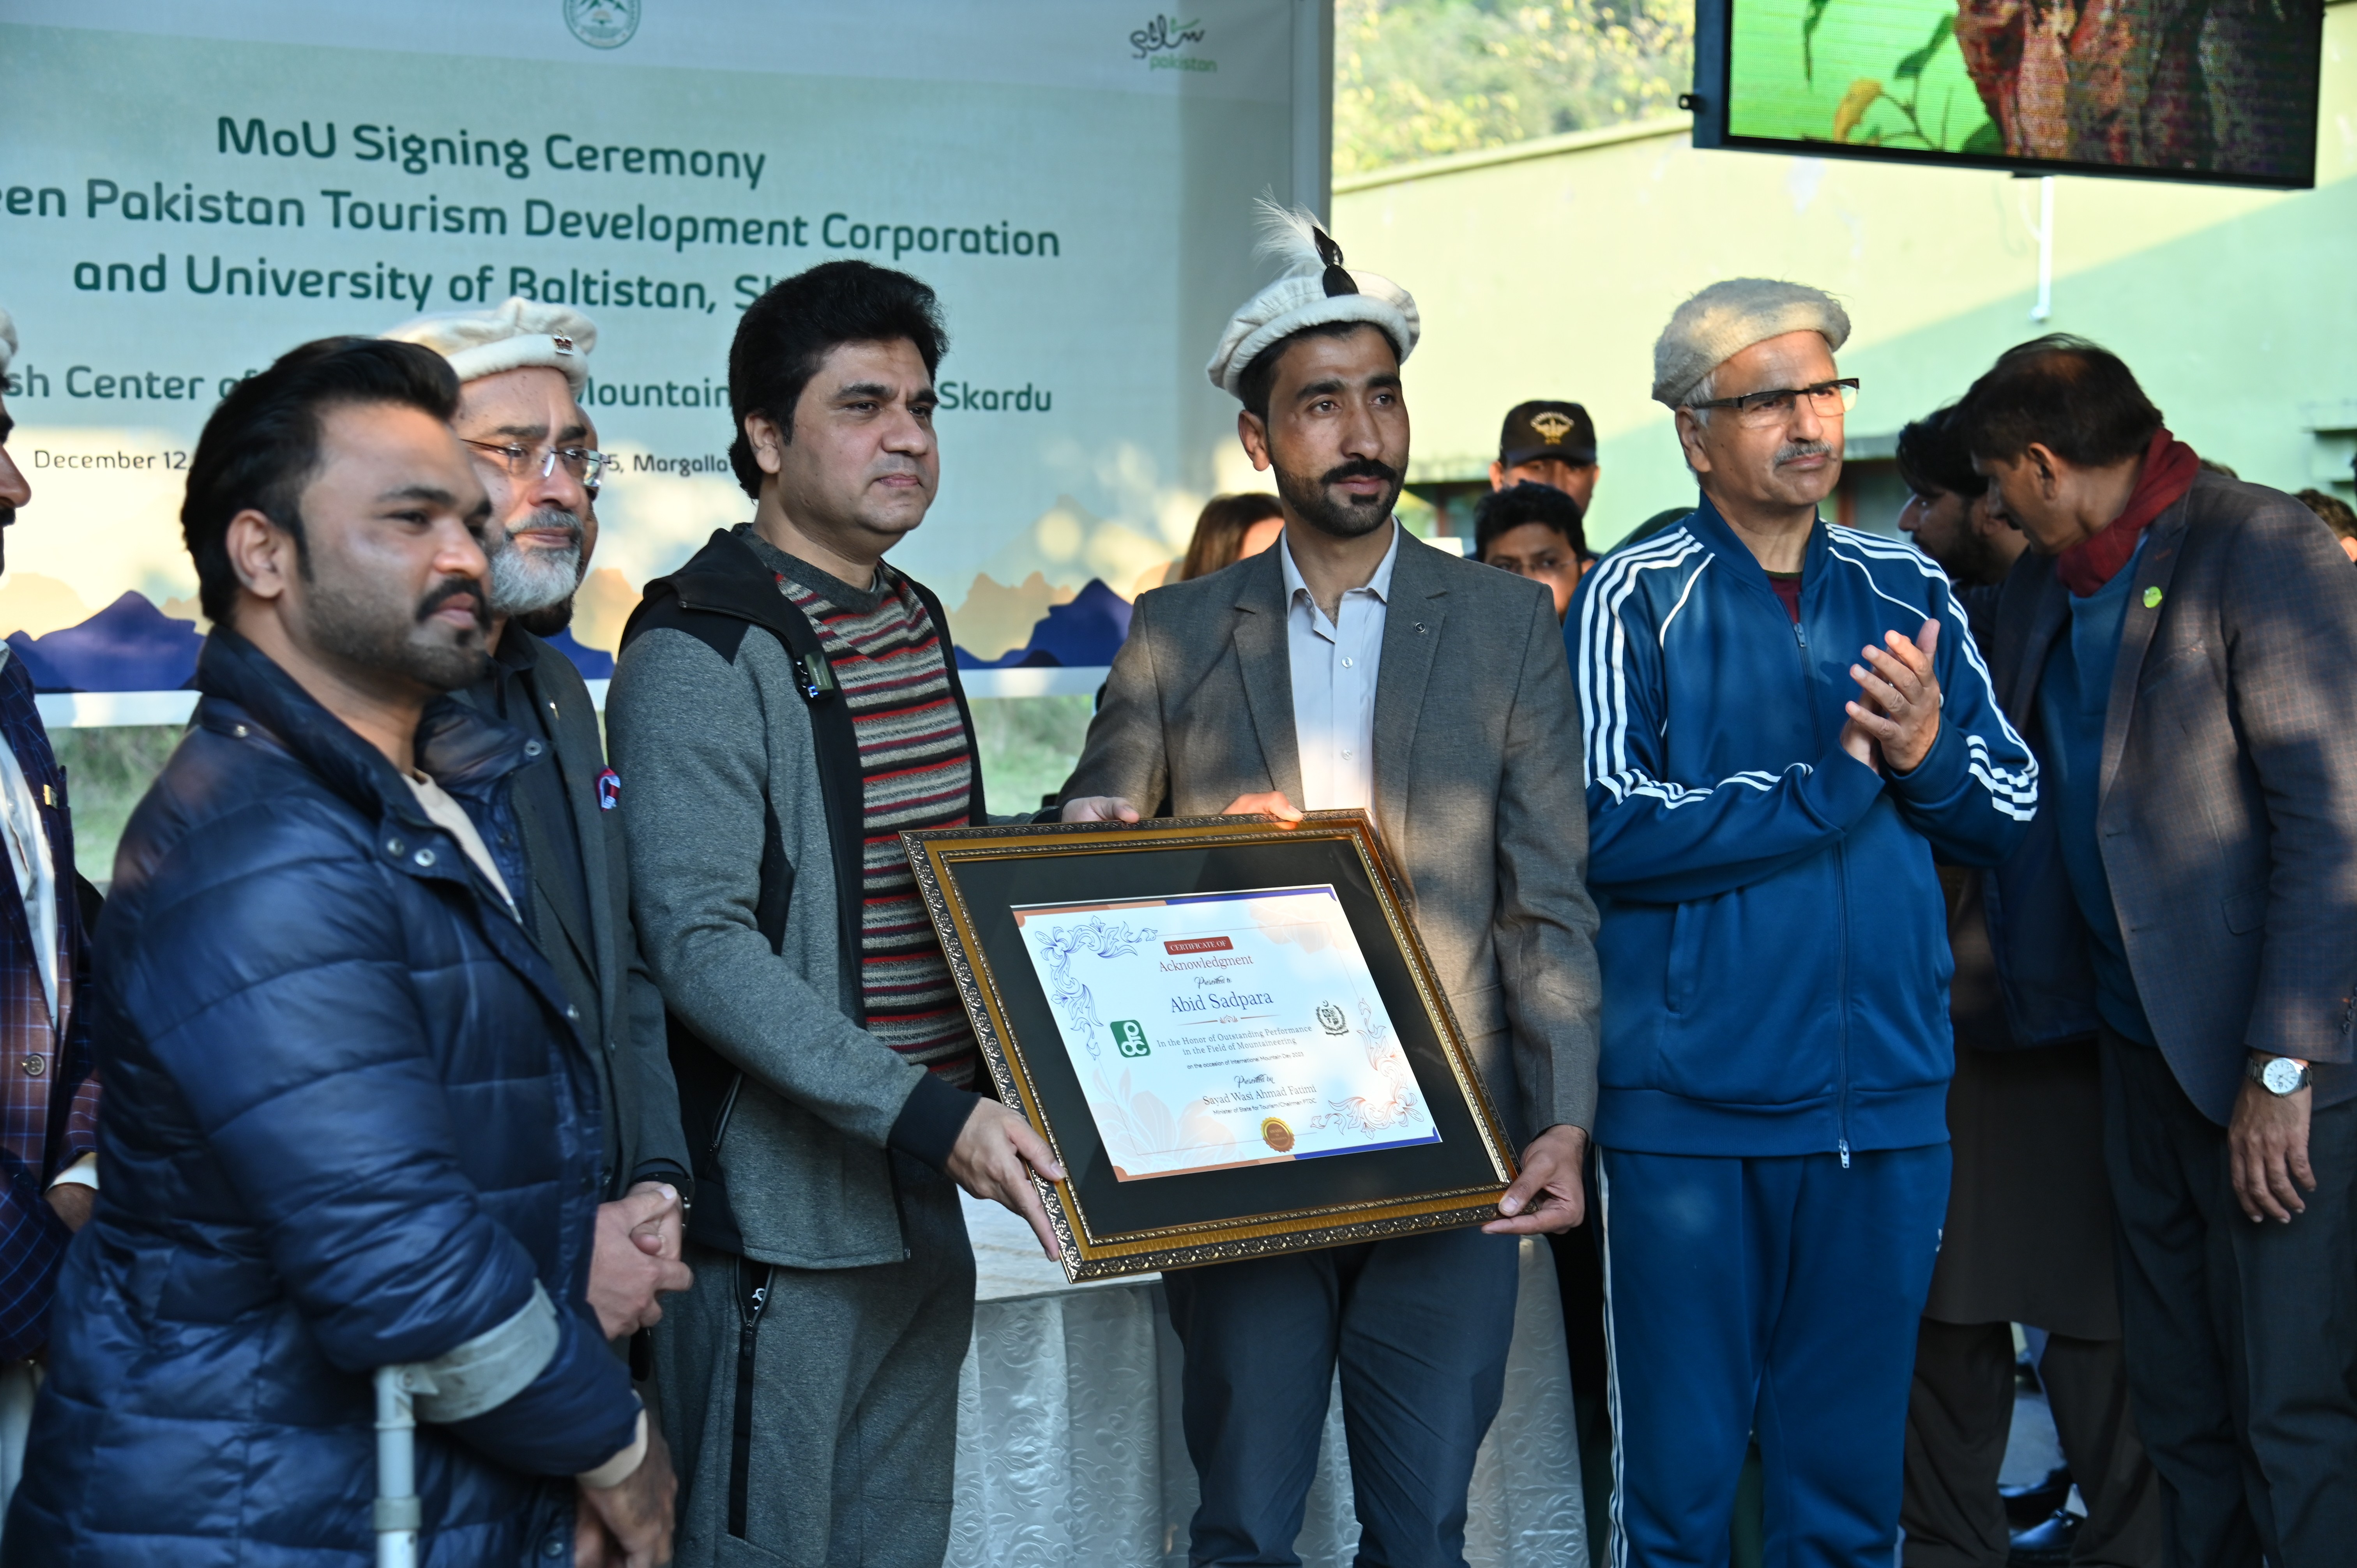 The certificate of acknowledgment presented to Abid Sadpara, a Pakistani high-altitude mountaineer